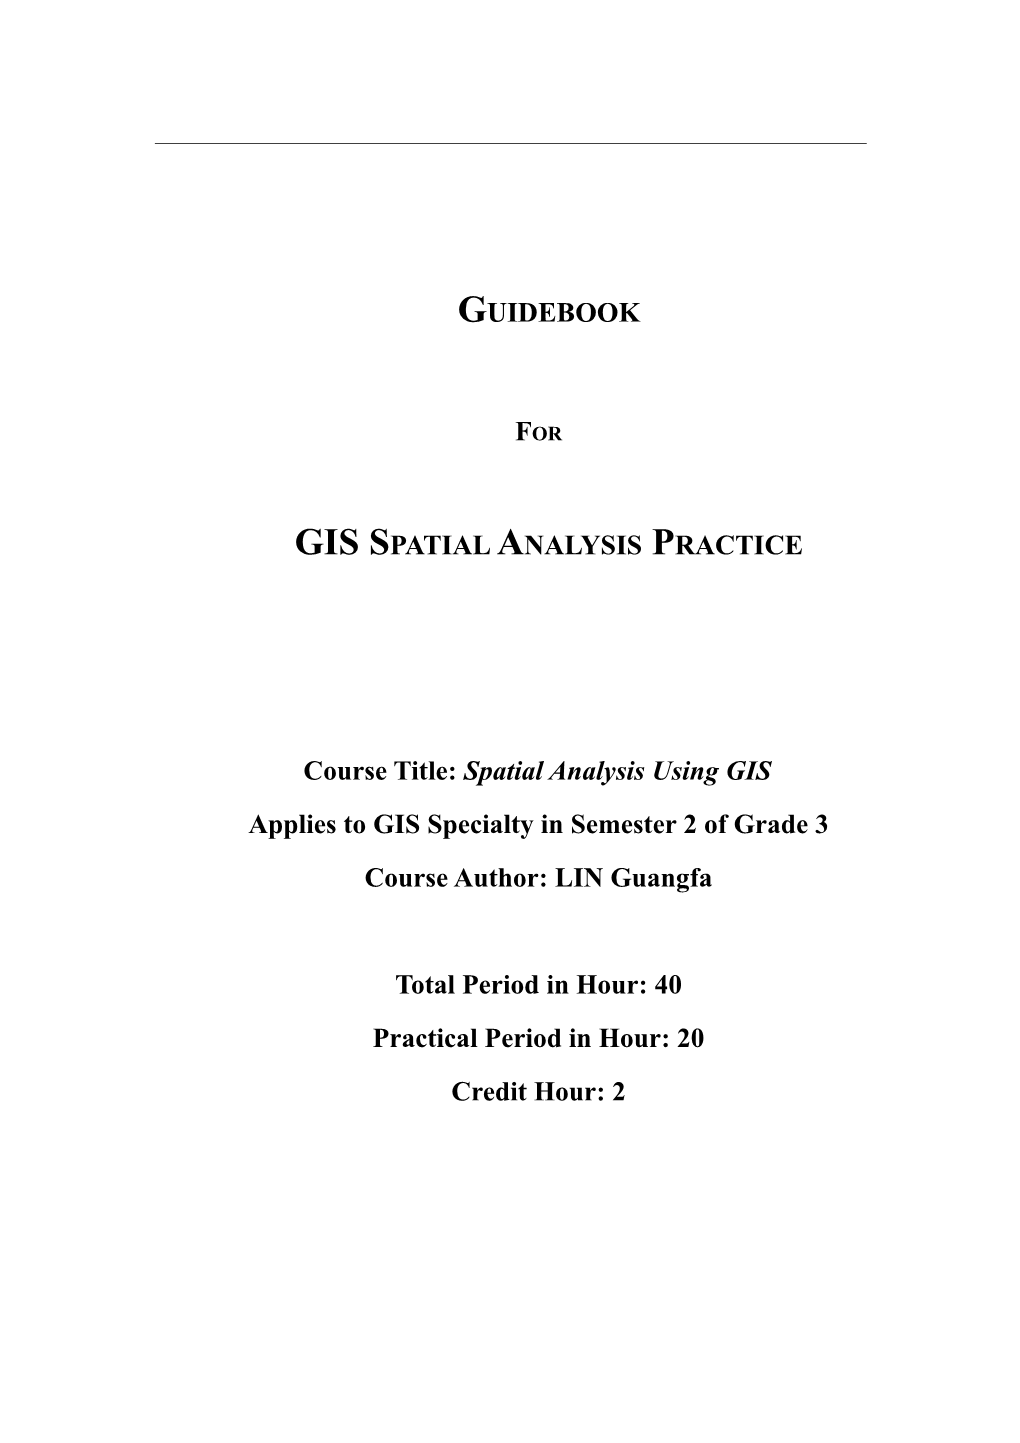 Guidebook for GIS Spatial Analysis Practice